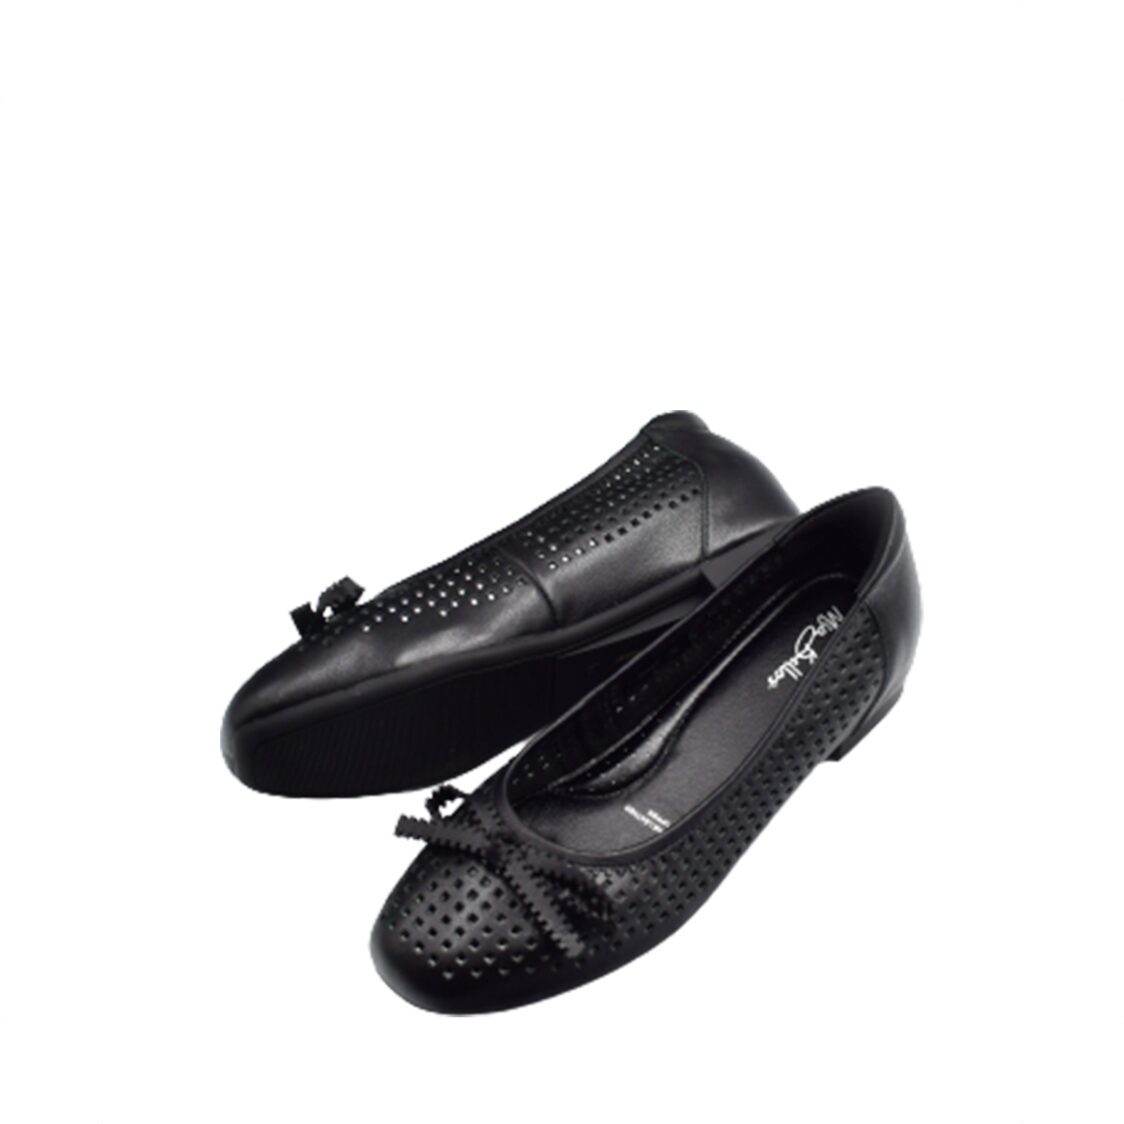 Mia Bellos Comfort Perforated Leather Shoe Black MB5045